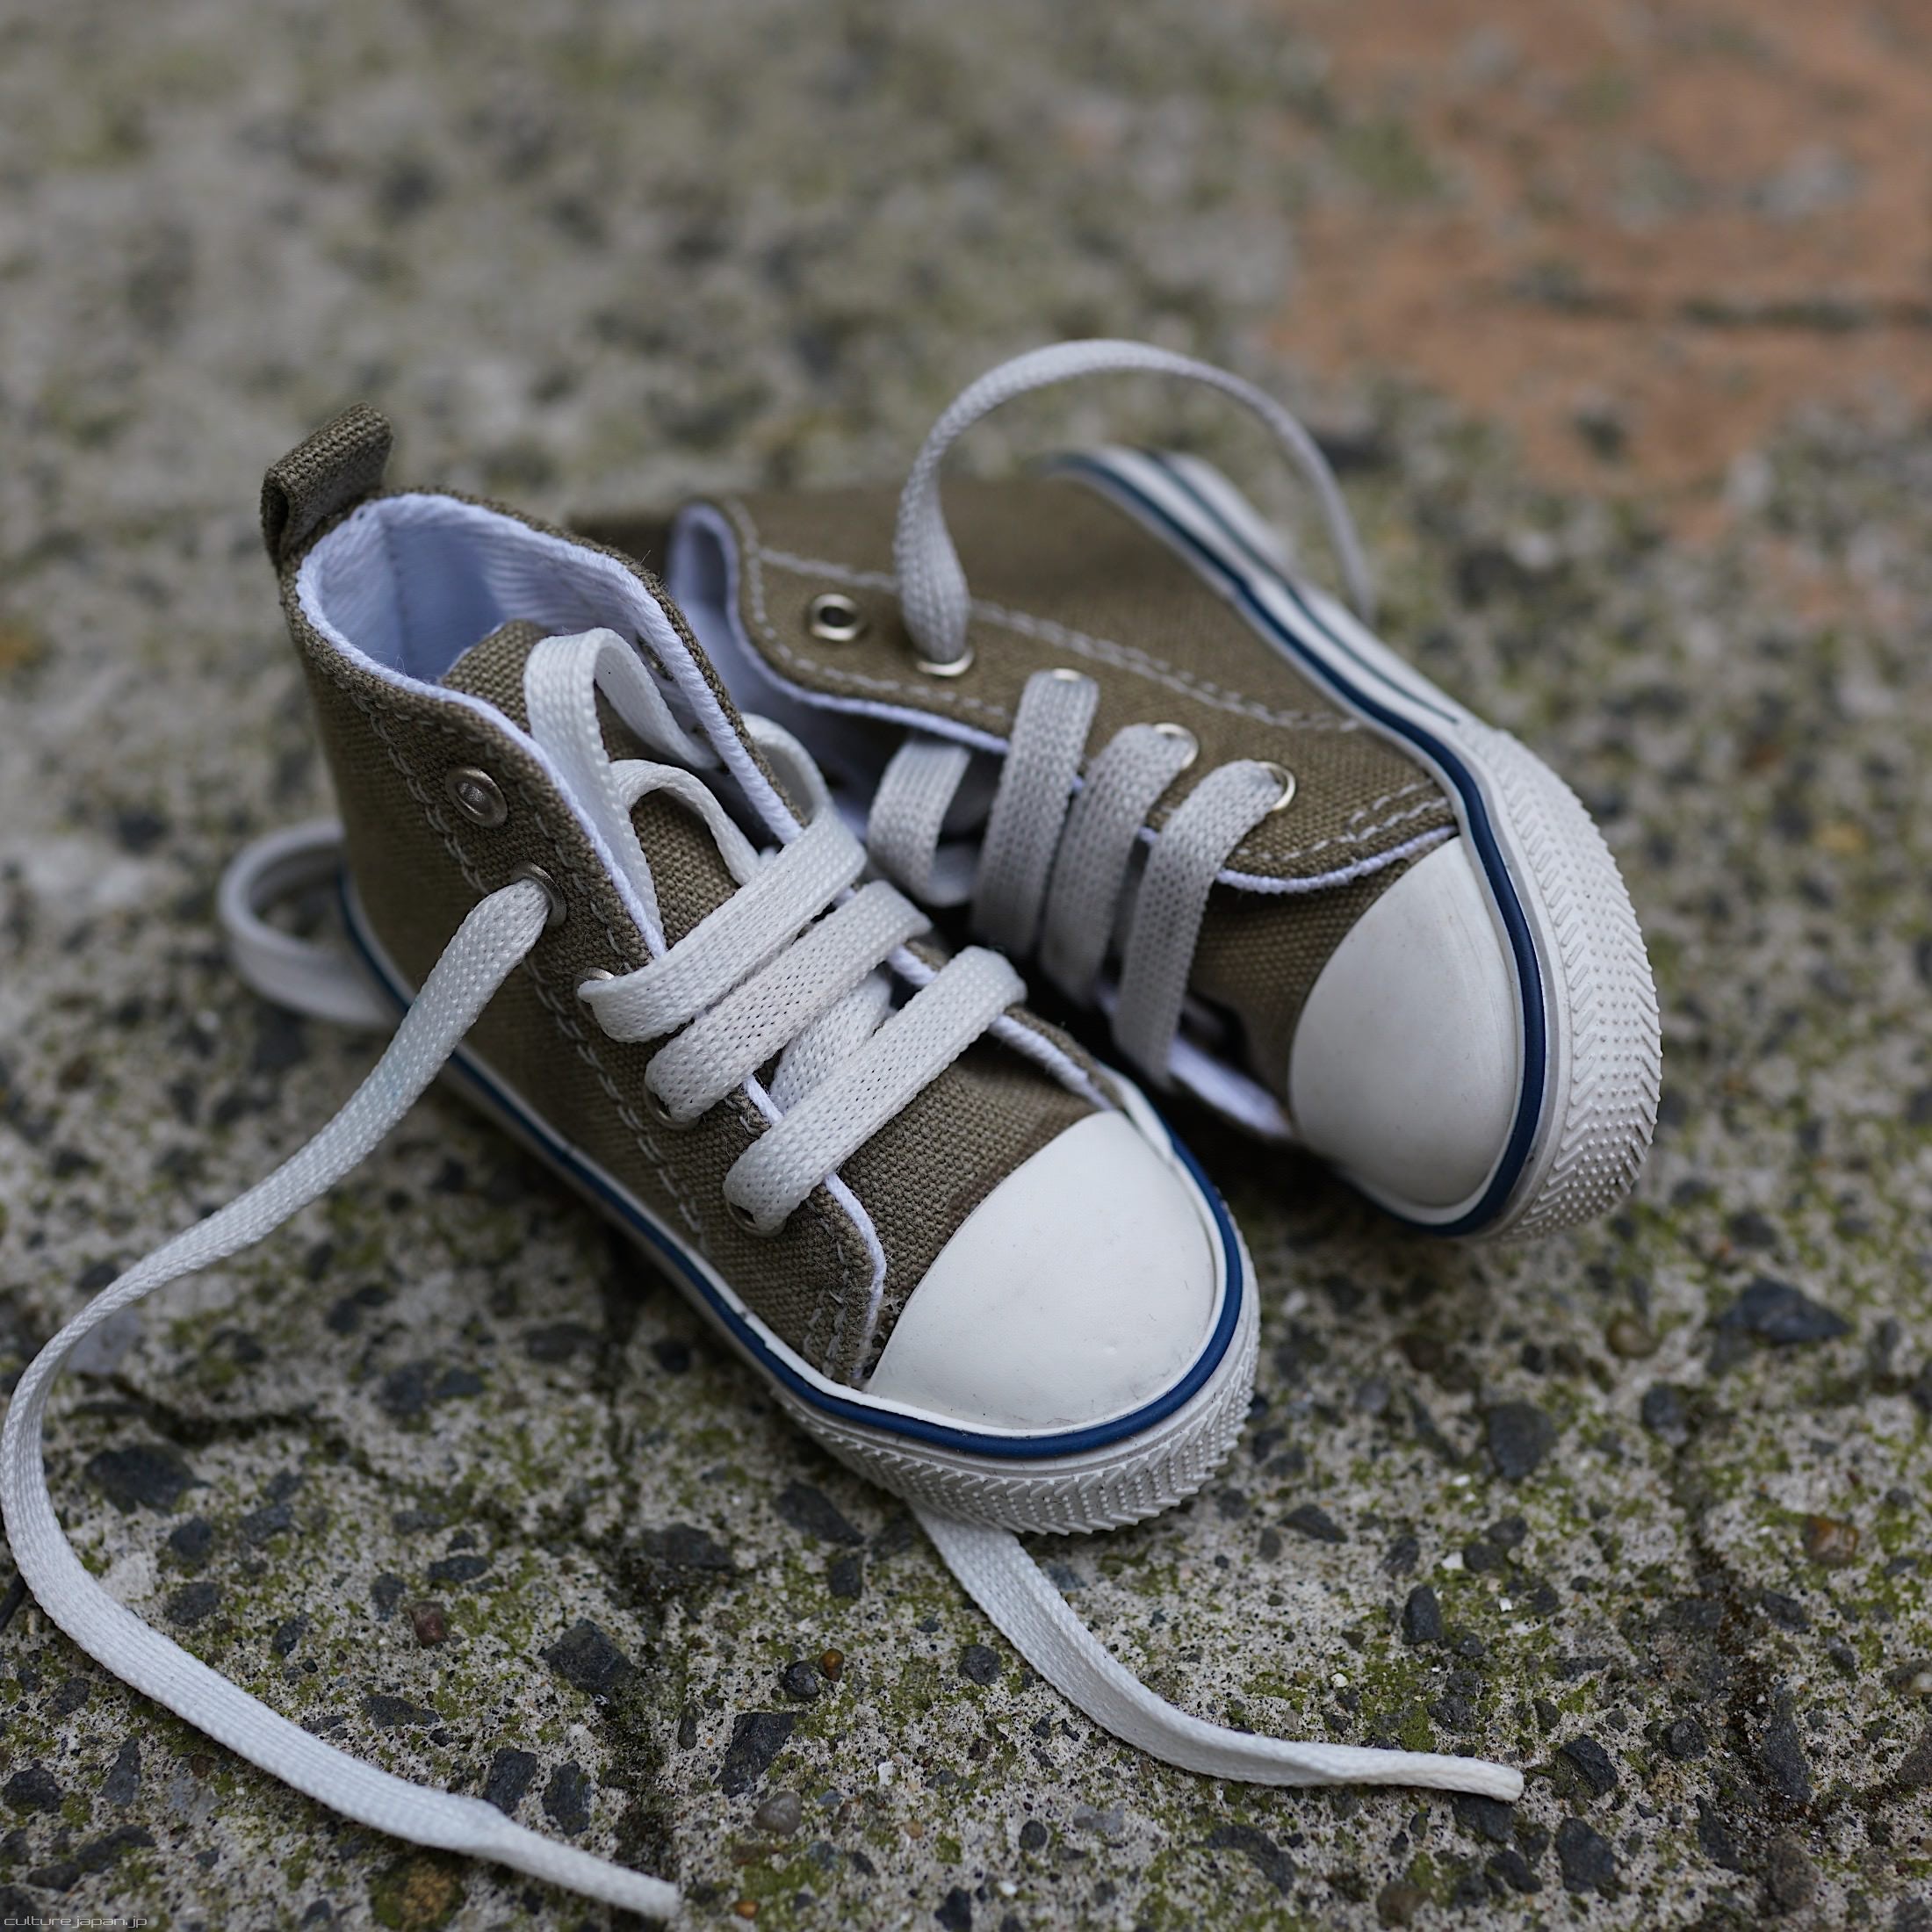 Weathered Canvas Shoes (Khaki Green) – Smart Doll Store